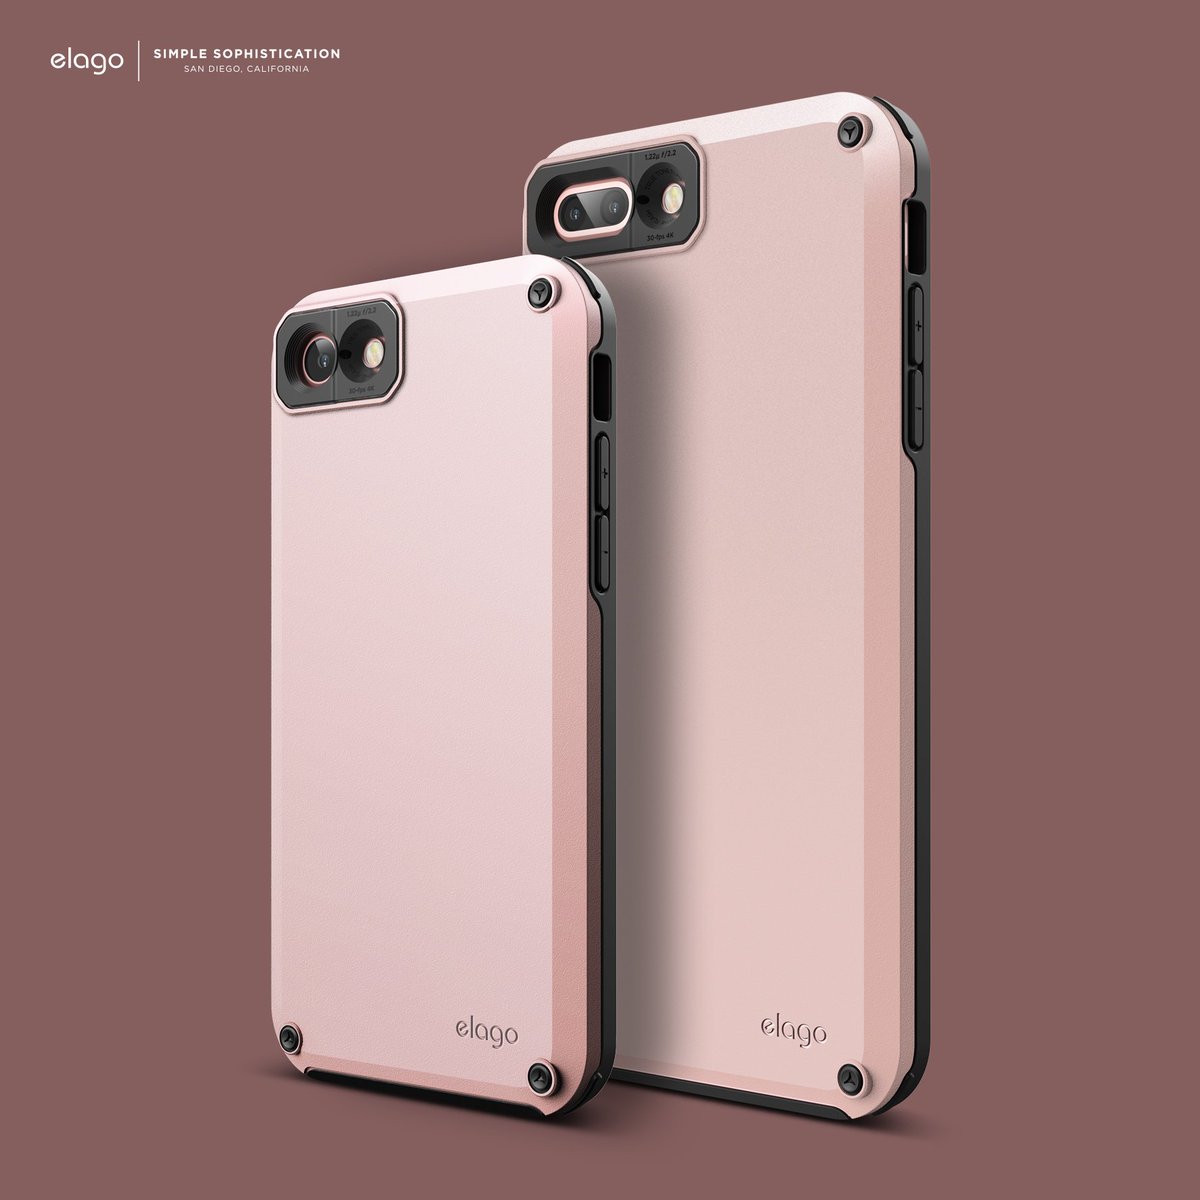 Elago Official Elago Iphone8 8 Plus Case Available Now On Amazon Armor Case For Iphone 8 8 Plus T Co Unatbencnj Iphone8 Iphone8plus Case T Co Vsekjsurvq